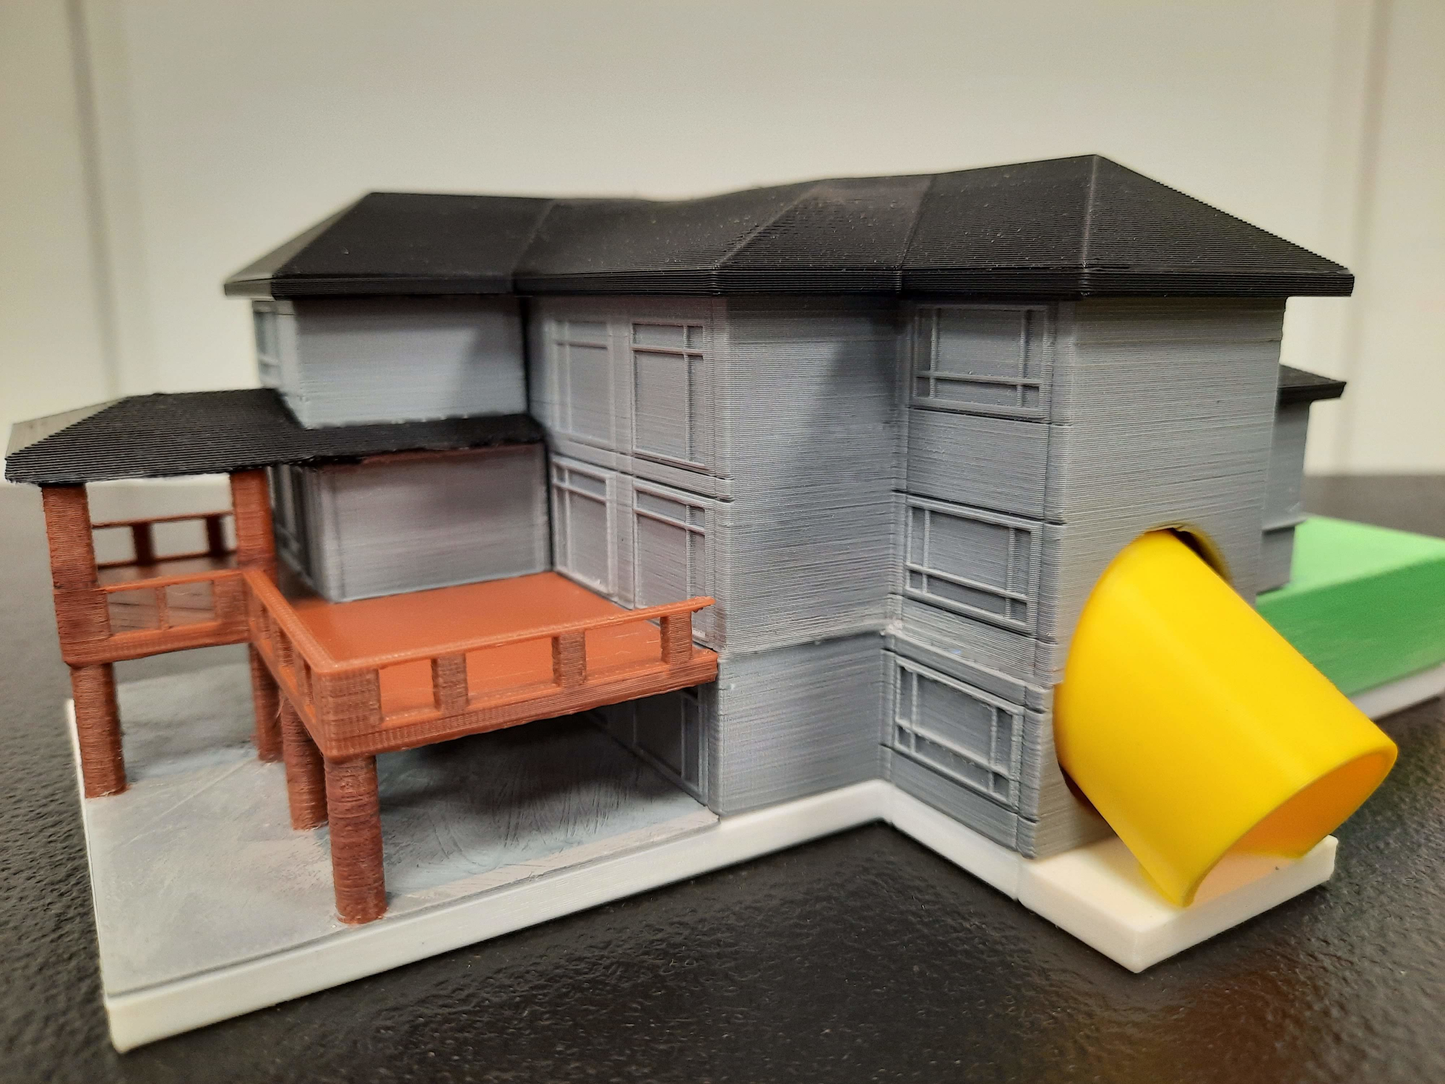 A Desktop Model of Your Home With a Dice Tower Option (Dice Tower Shown)